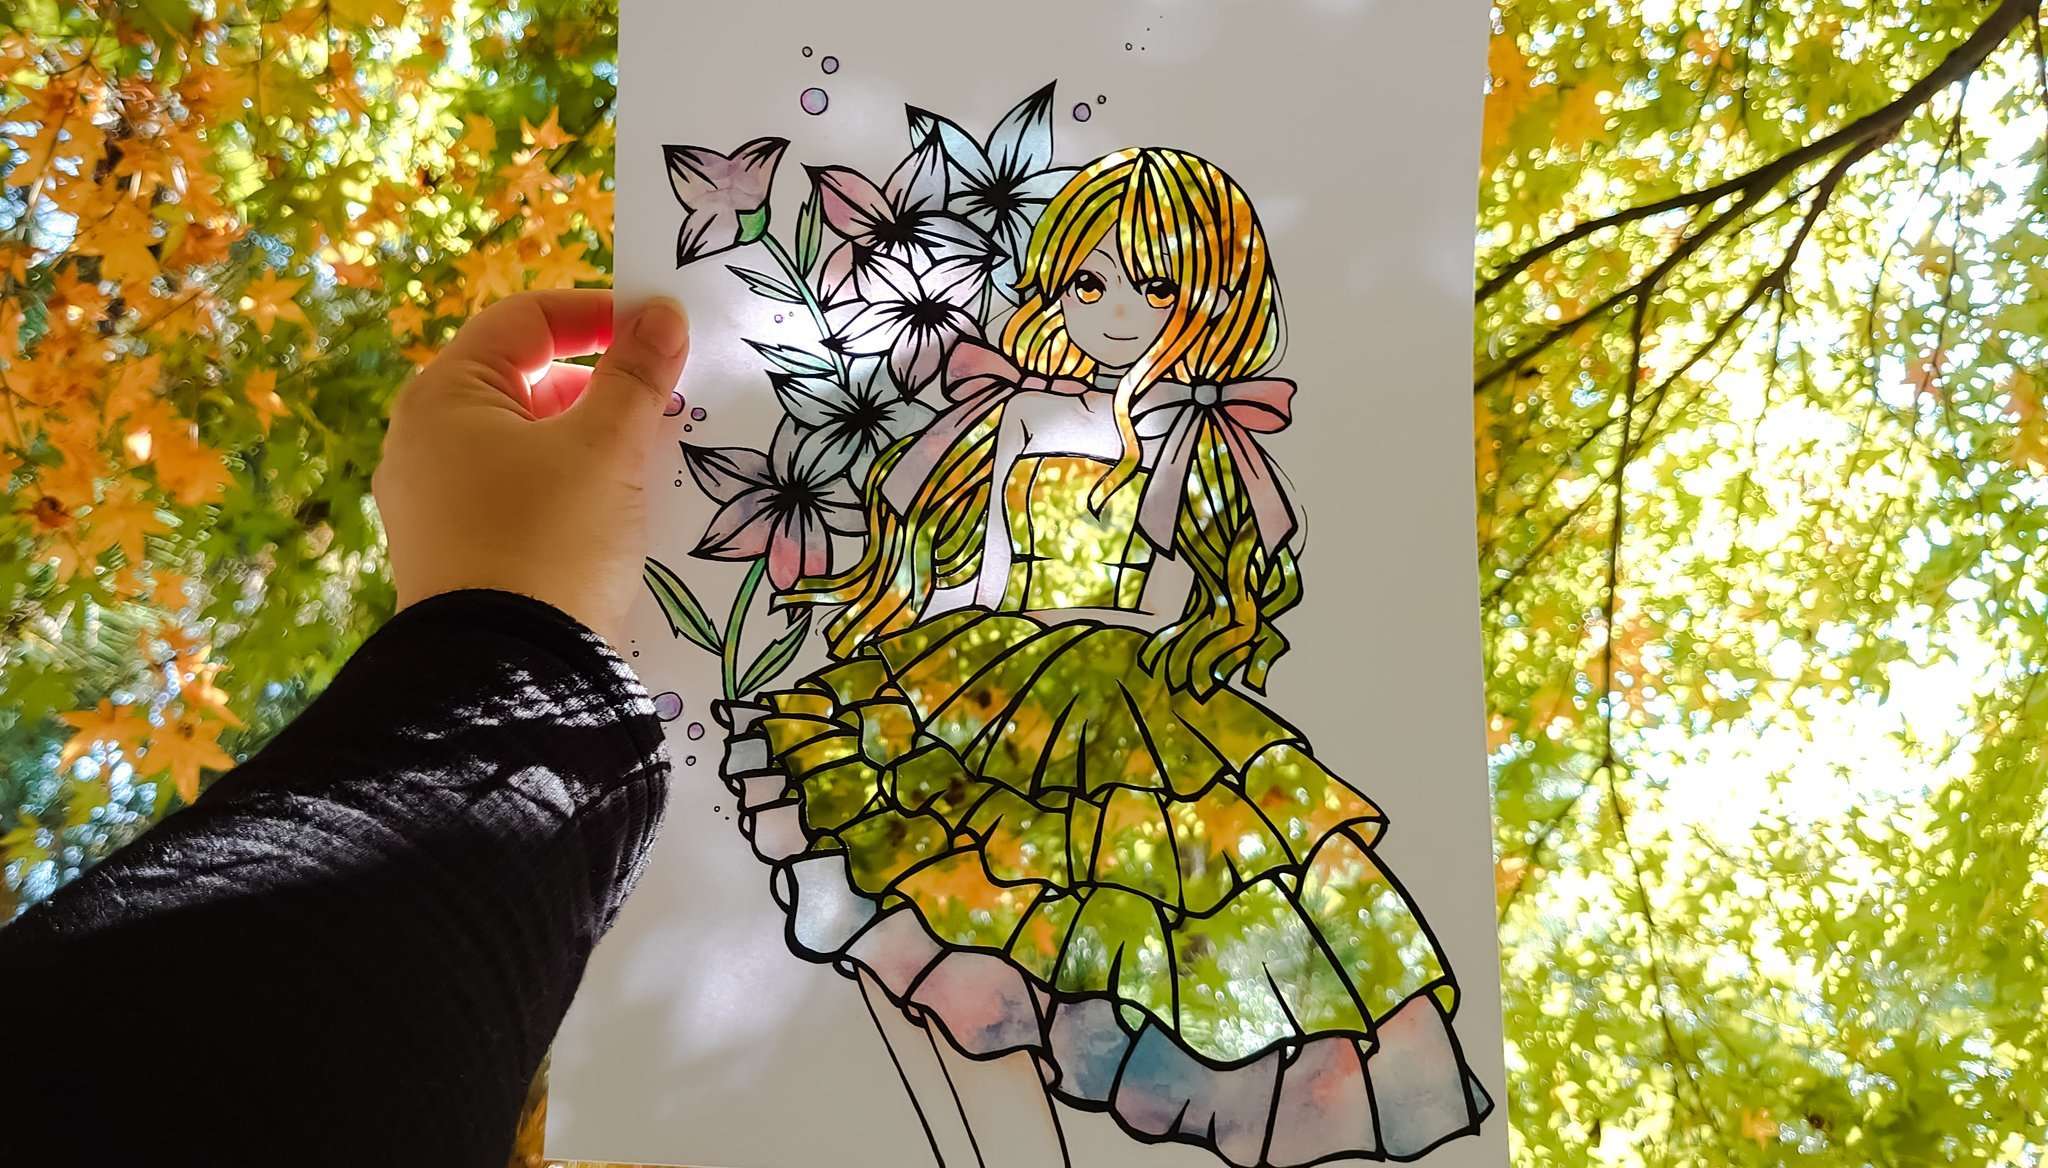 The Japanese Kirie Artist Fills In The Drawings By Changing The Nature